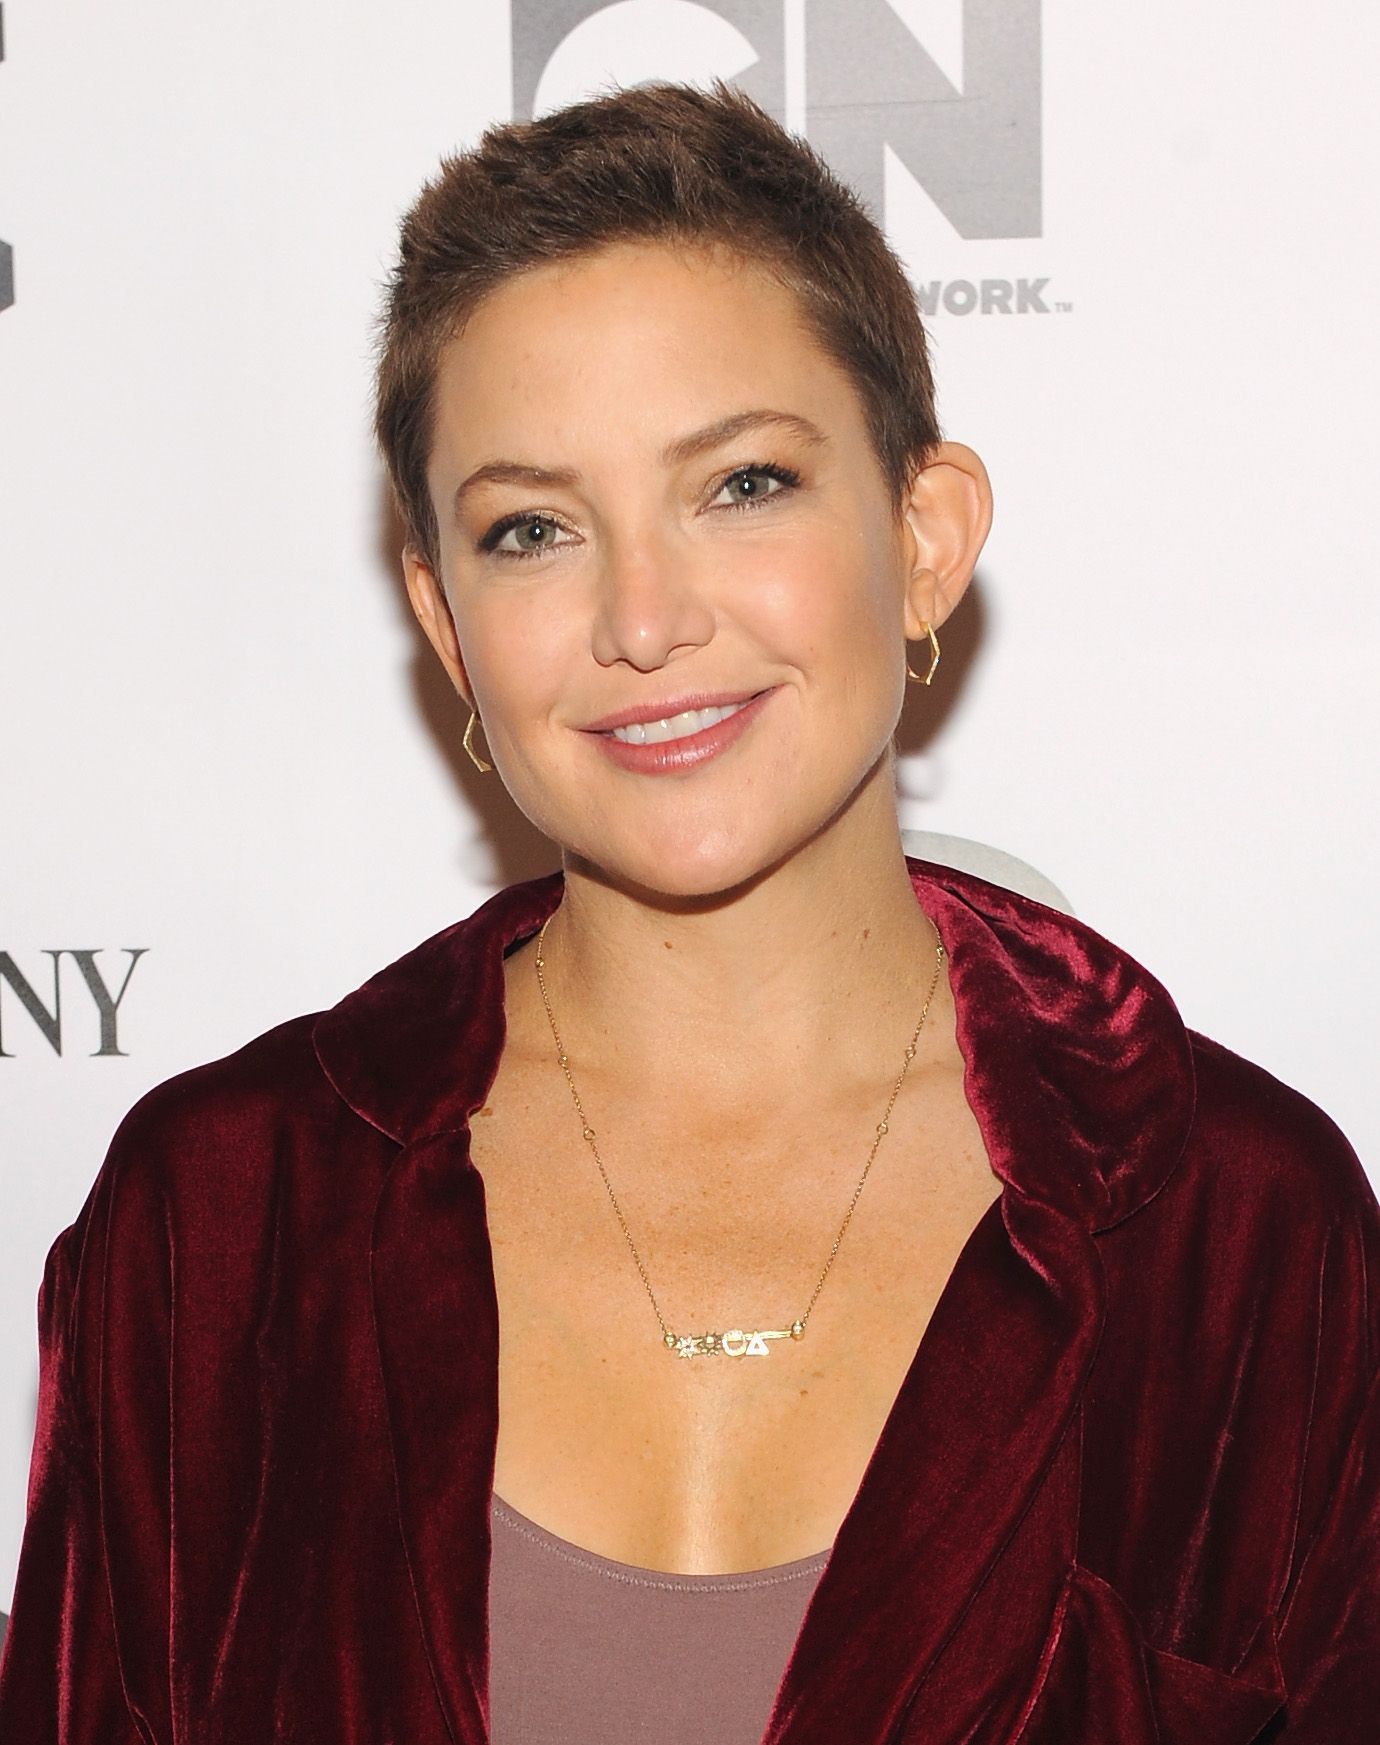 Kate Hudson during the Fast Company Innovation Festival at 92nd Street Y on October 26, 2017 in New York City | Photo: Getty Images 